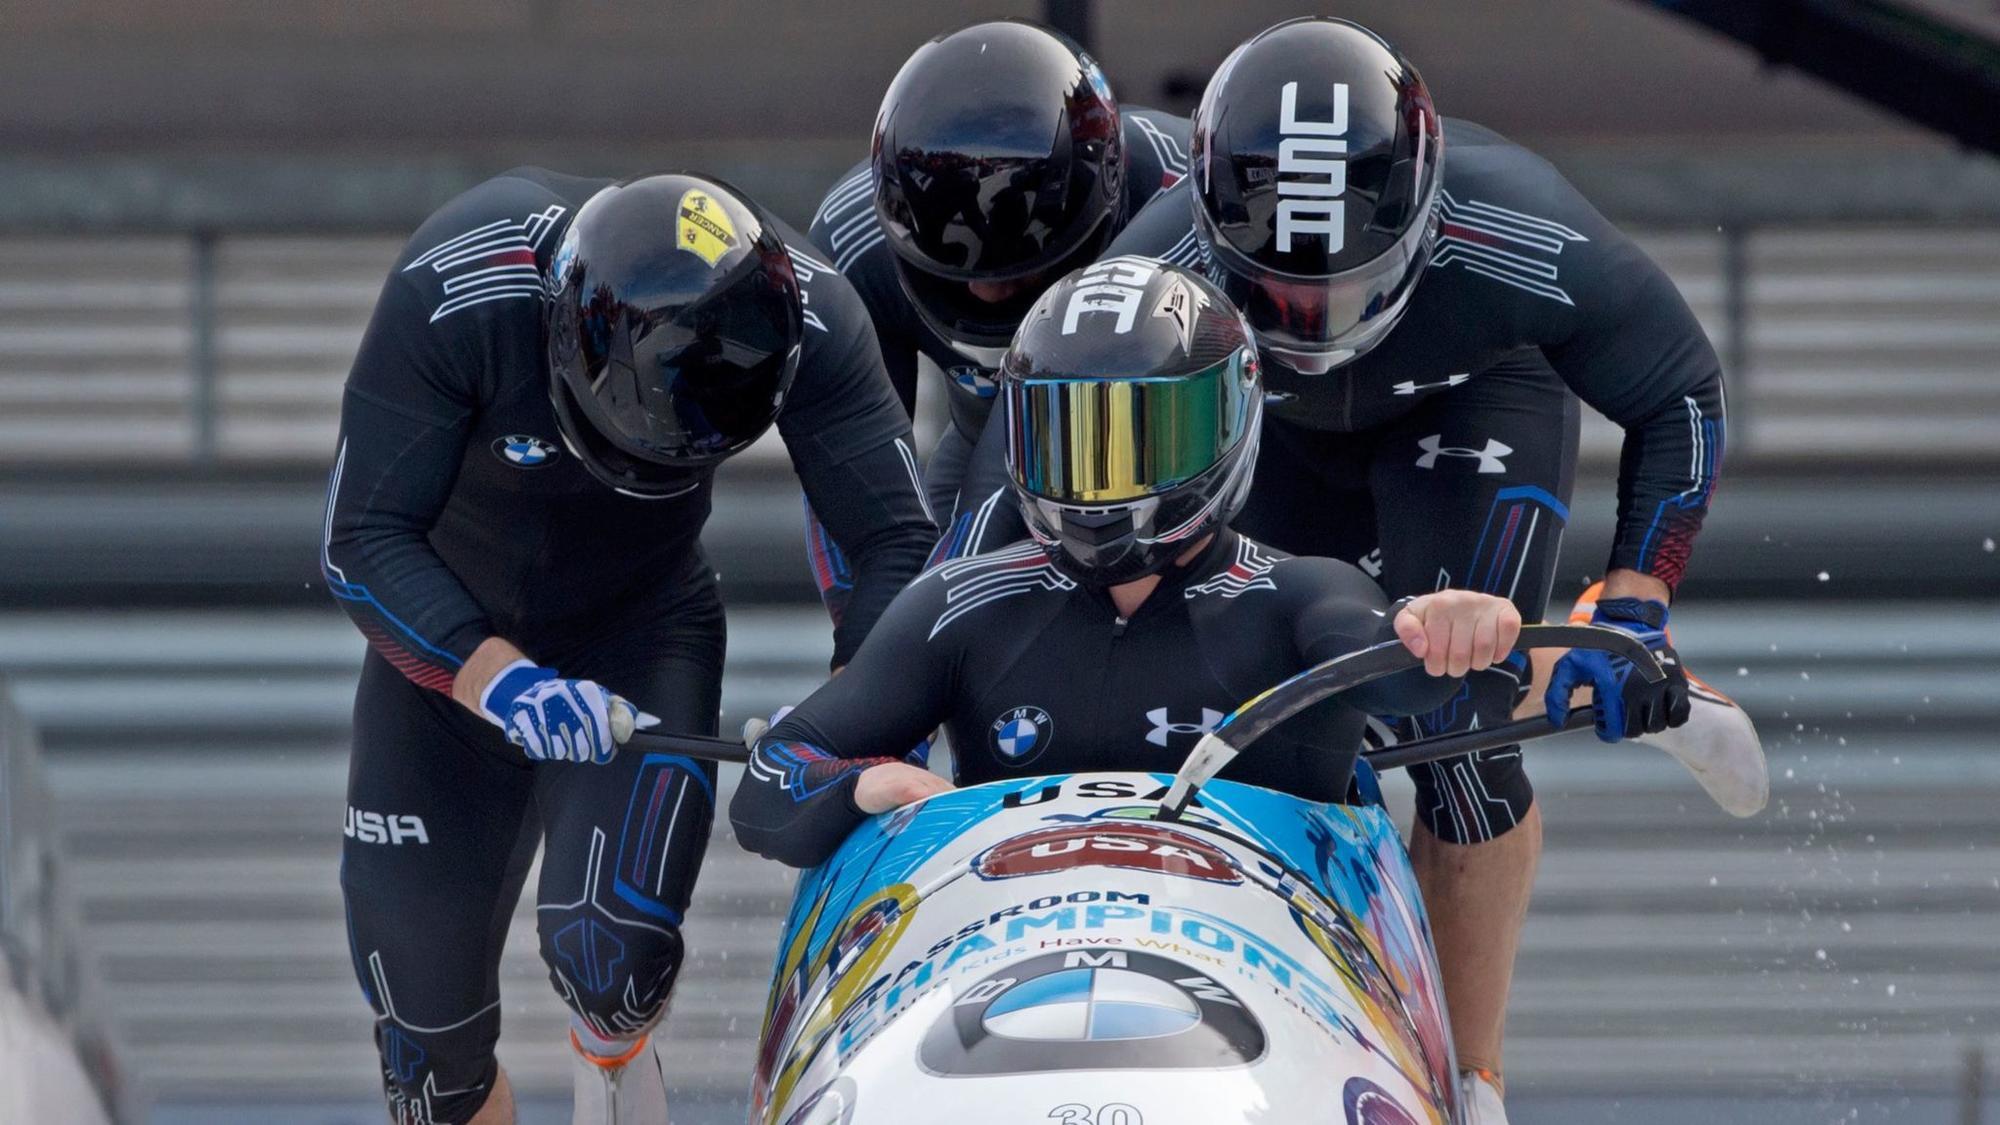 Tough bobsled season for U.S. men coming to an end - Chicago Tribune